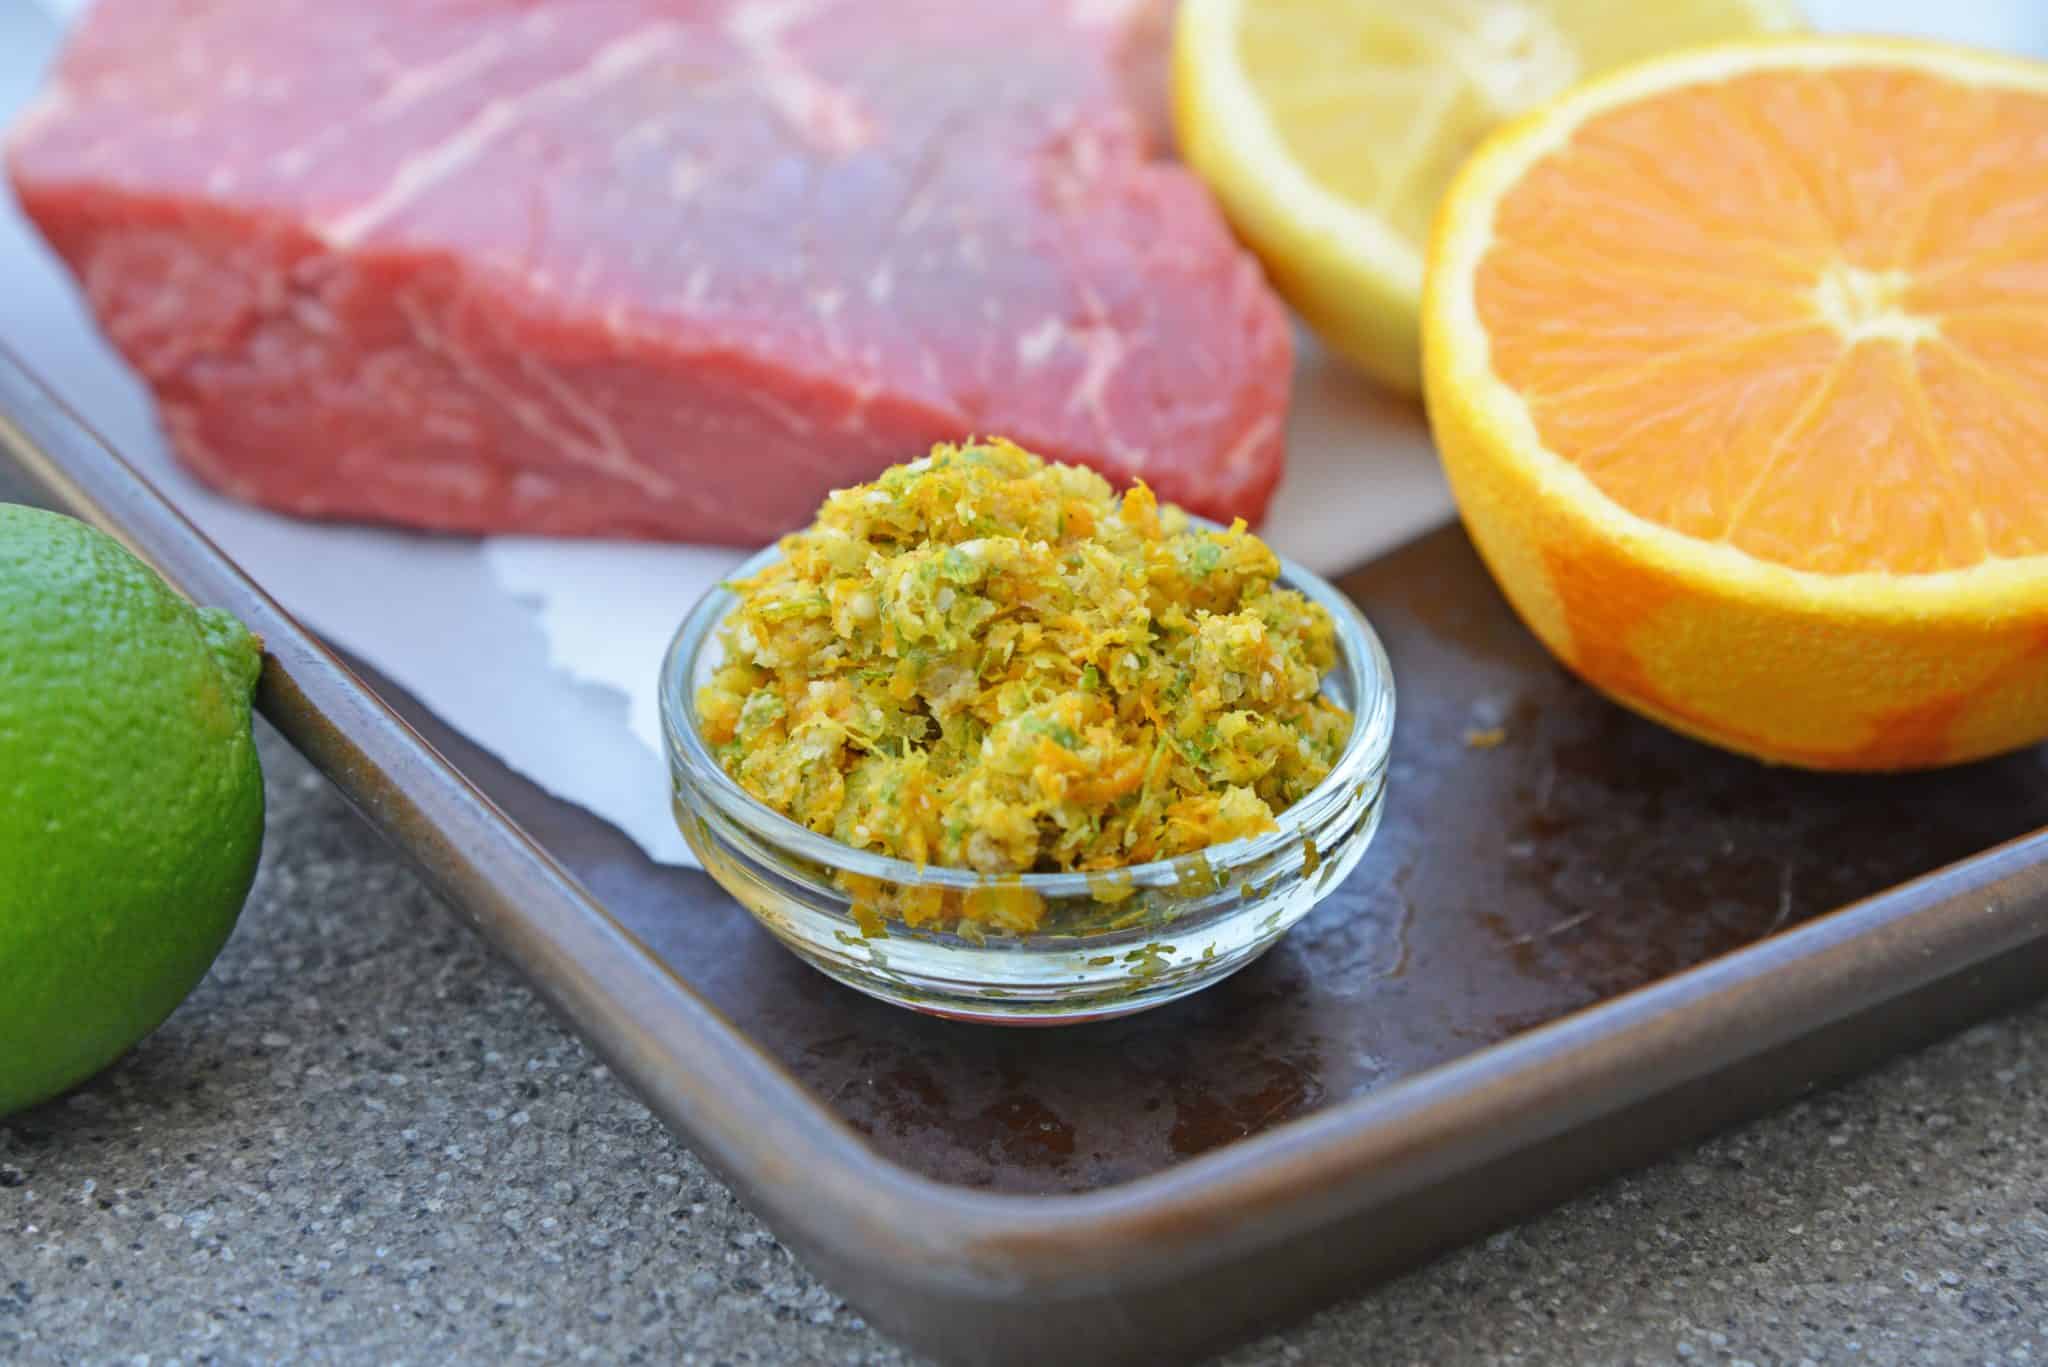 Citrus Steak Rub makes the best steak seasoning! With lemon, lime and orange zests, this is a dry rub that you will use over and over again. #steakdryrub #steakseasoning #beststeakdryrub www.savoryexperiments.com